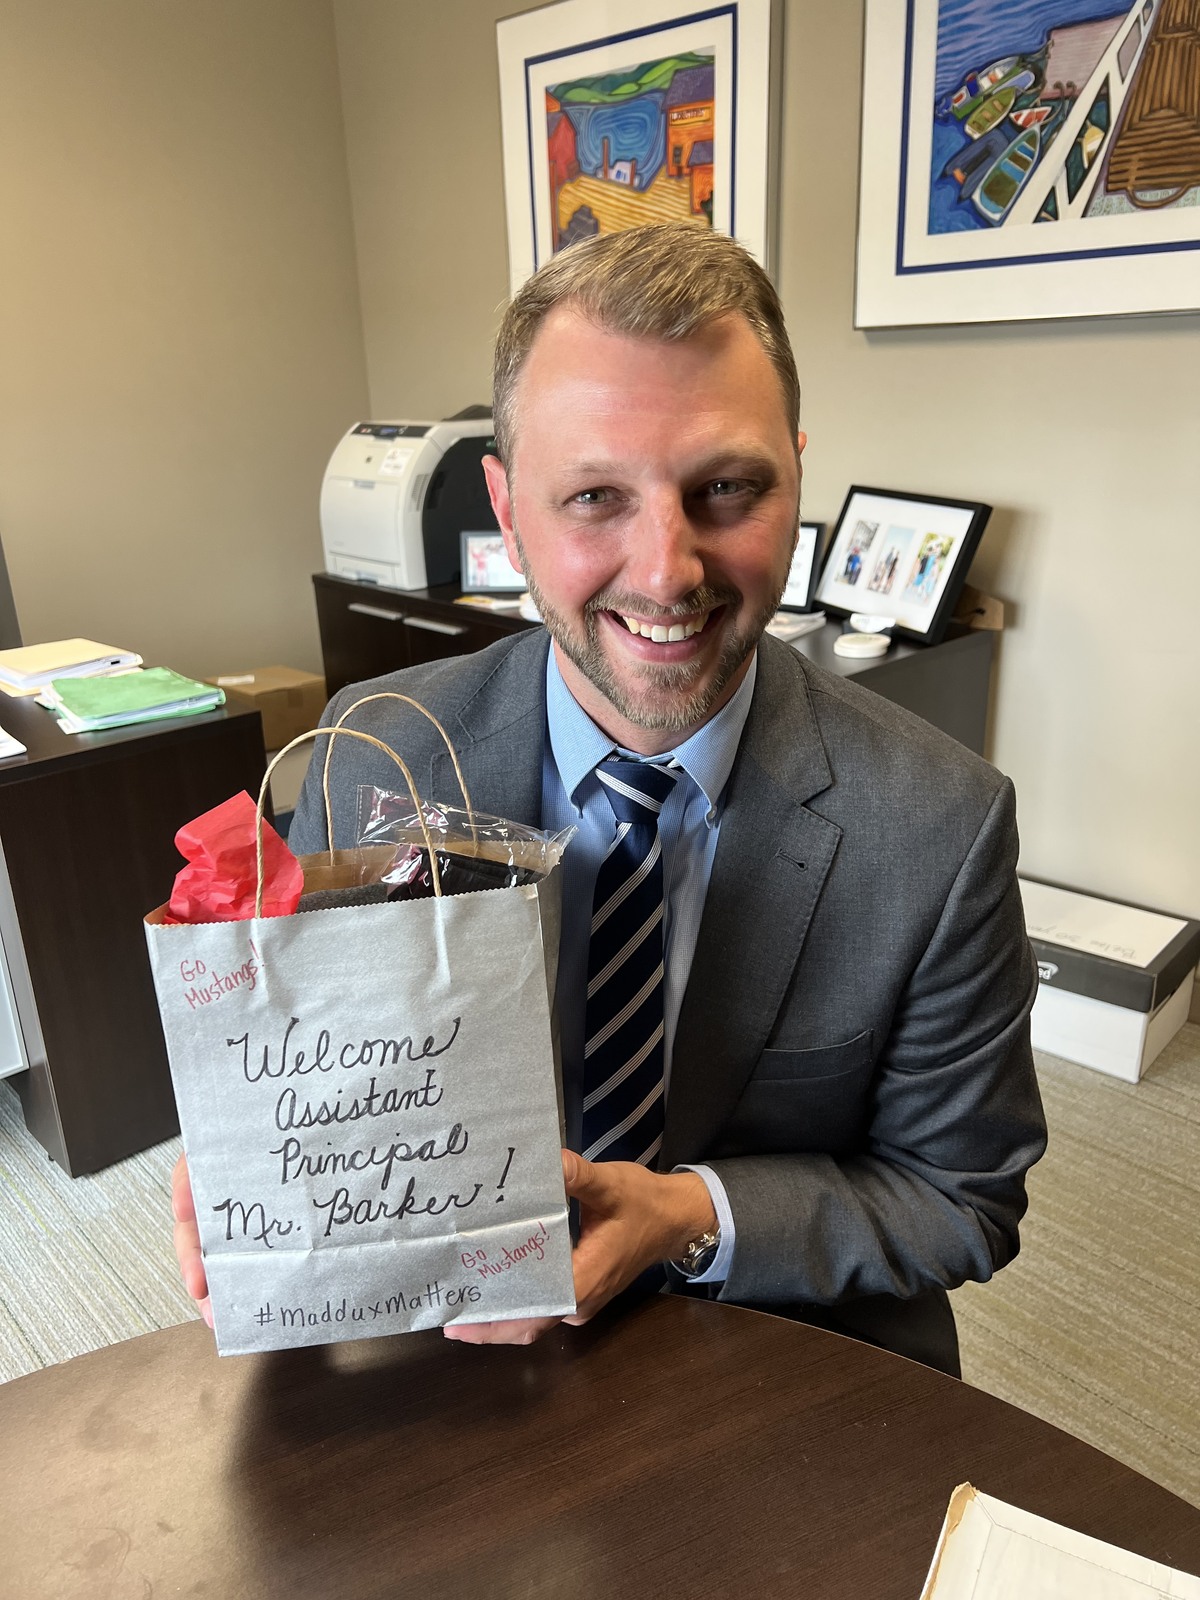 Chris Barker holds a welcome gift at Maddux